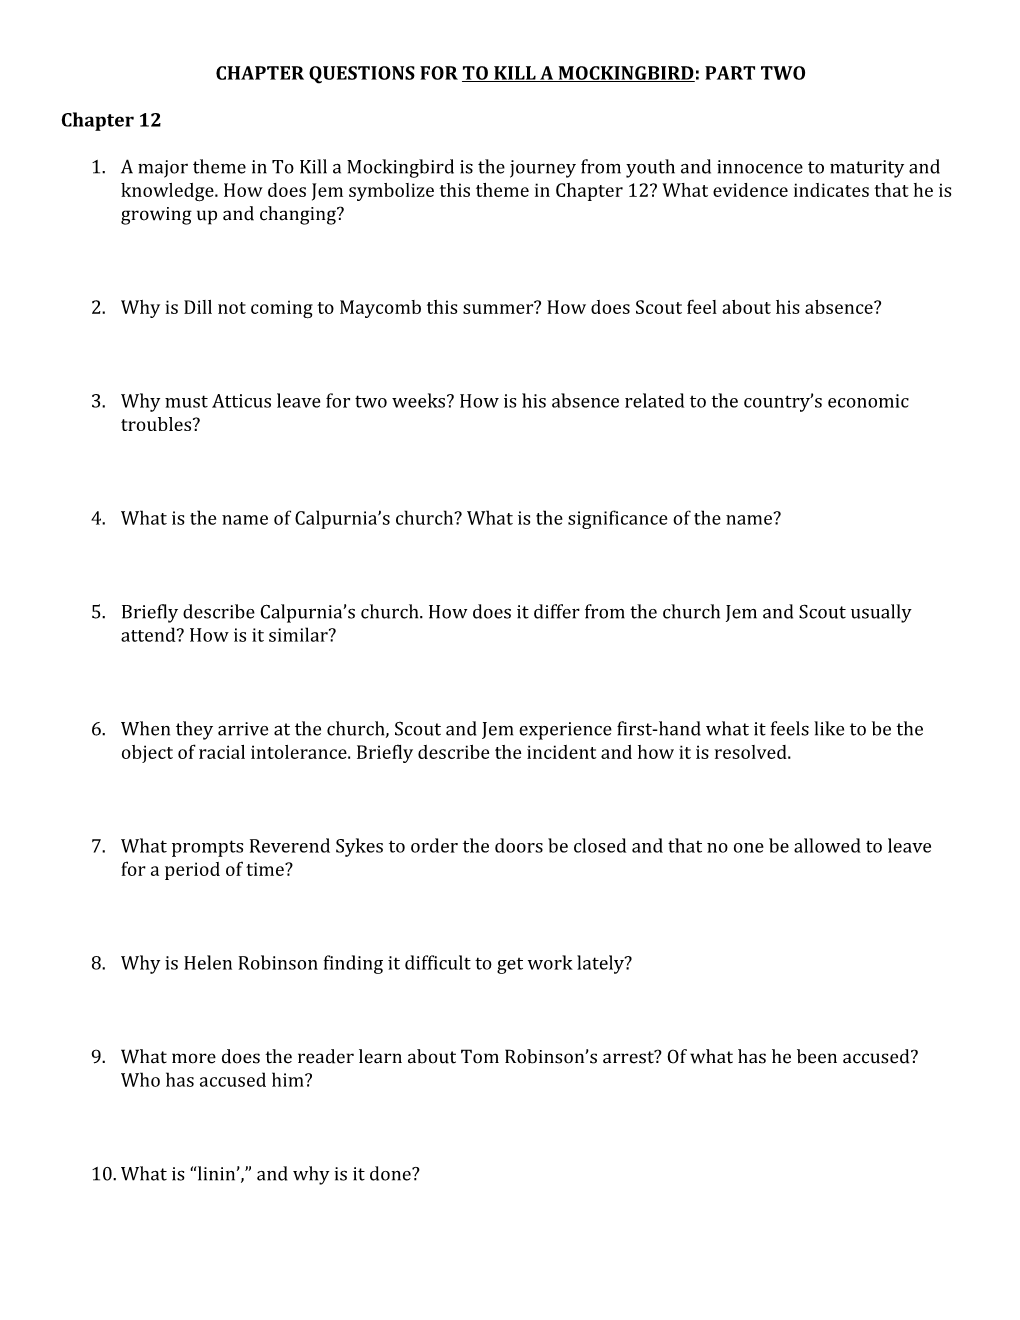 Chapter Questions for to Kill a Mockingbird: Part Two